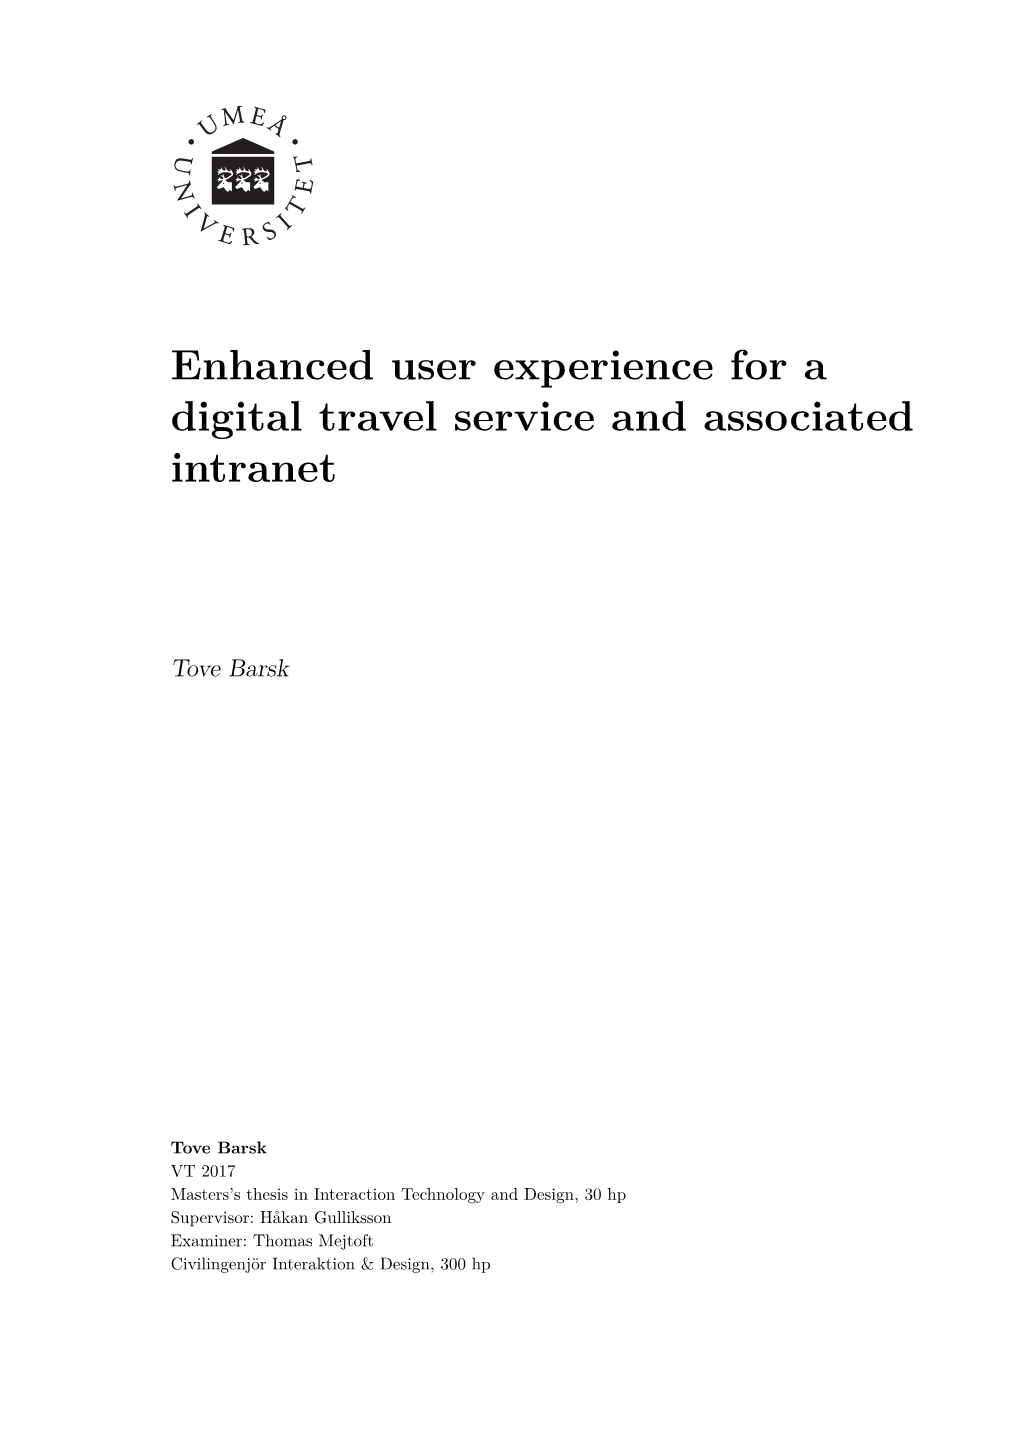 Enhanced User Experience for a Digital Travel Service and Associated Intranet